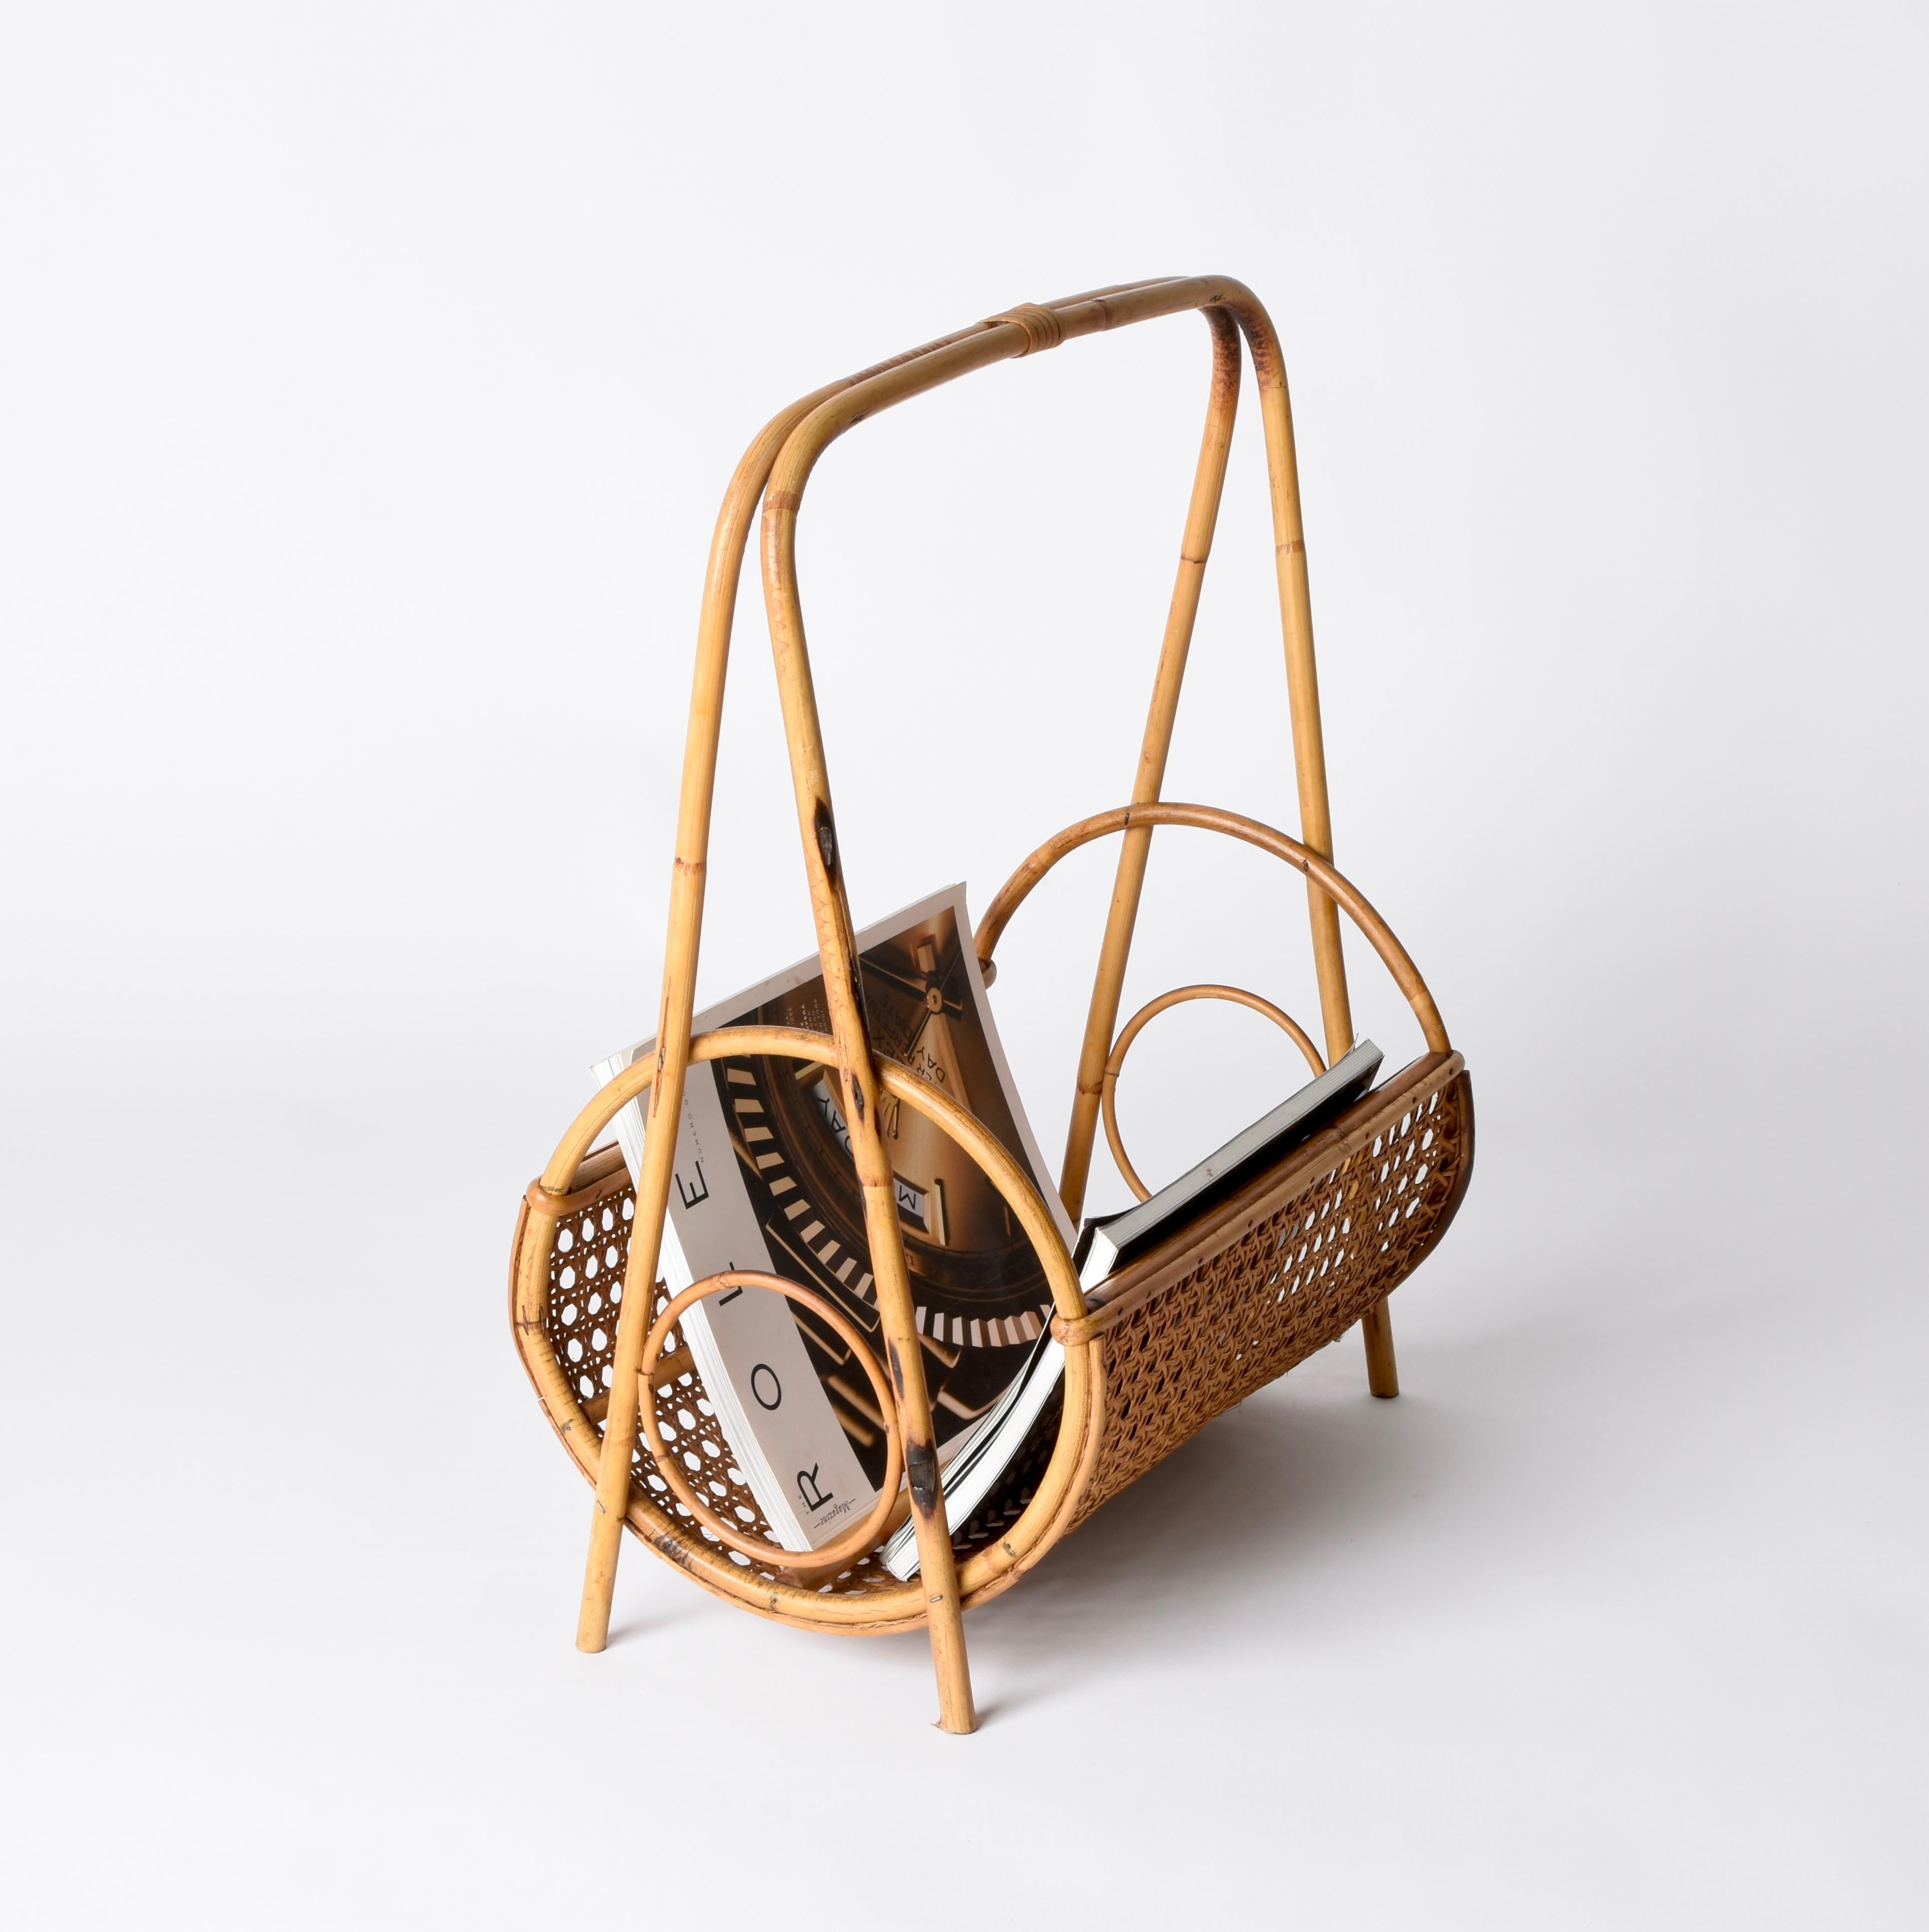 Midcentury French Riviera Bamboo and Rattan Italian Magazine Rack, 1960s For Sale 7